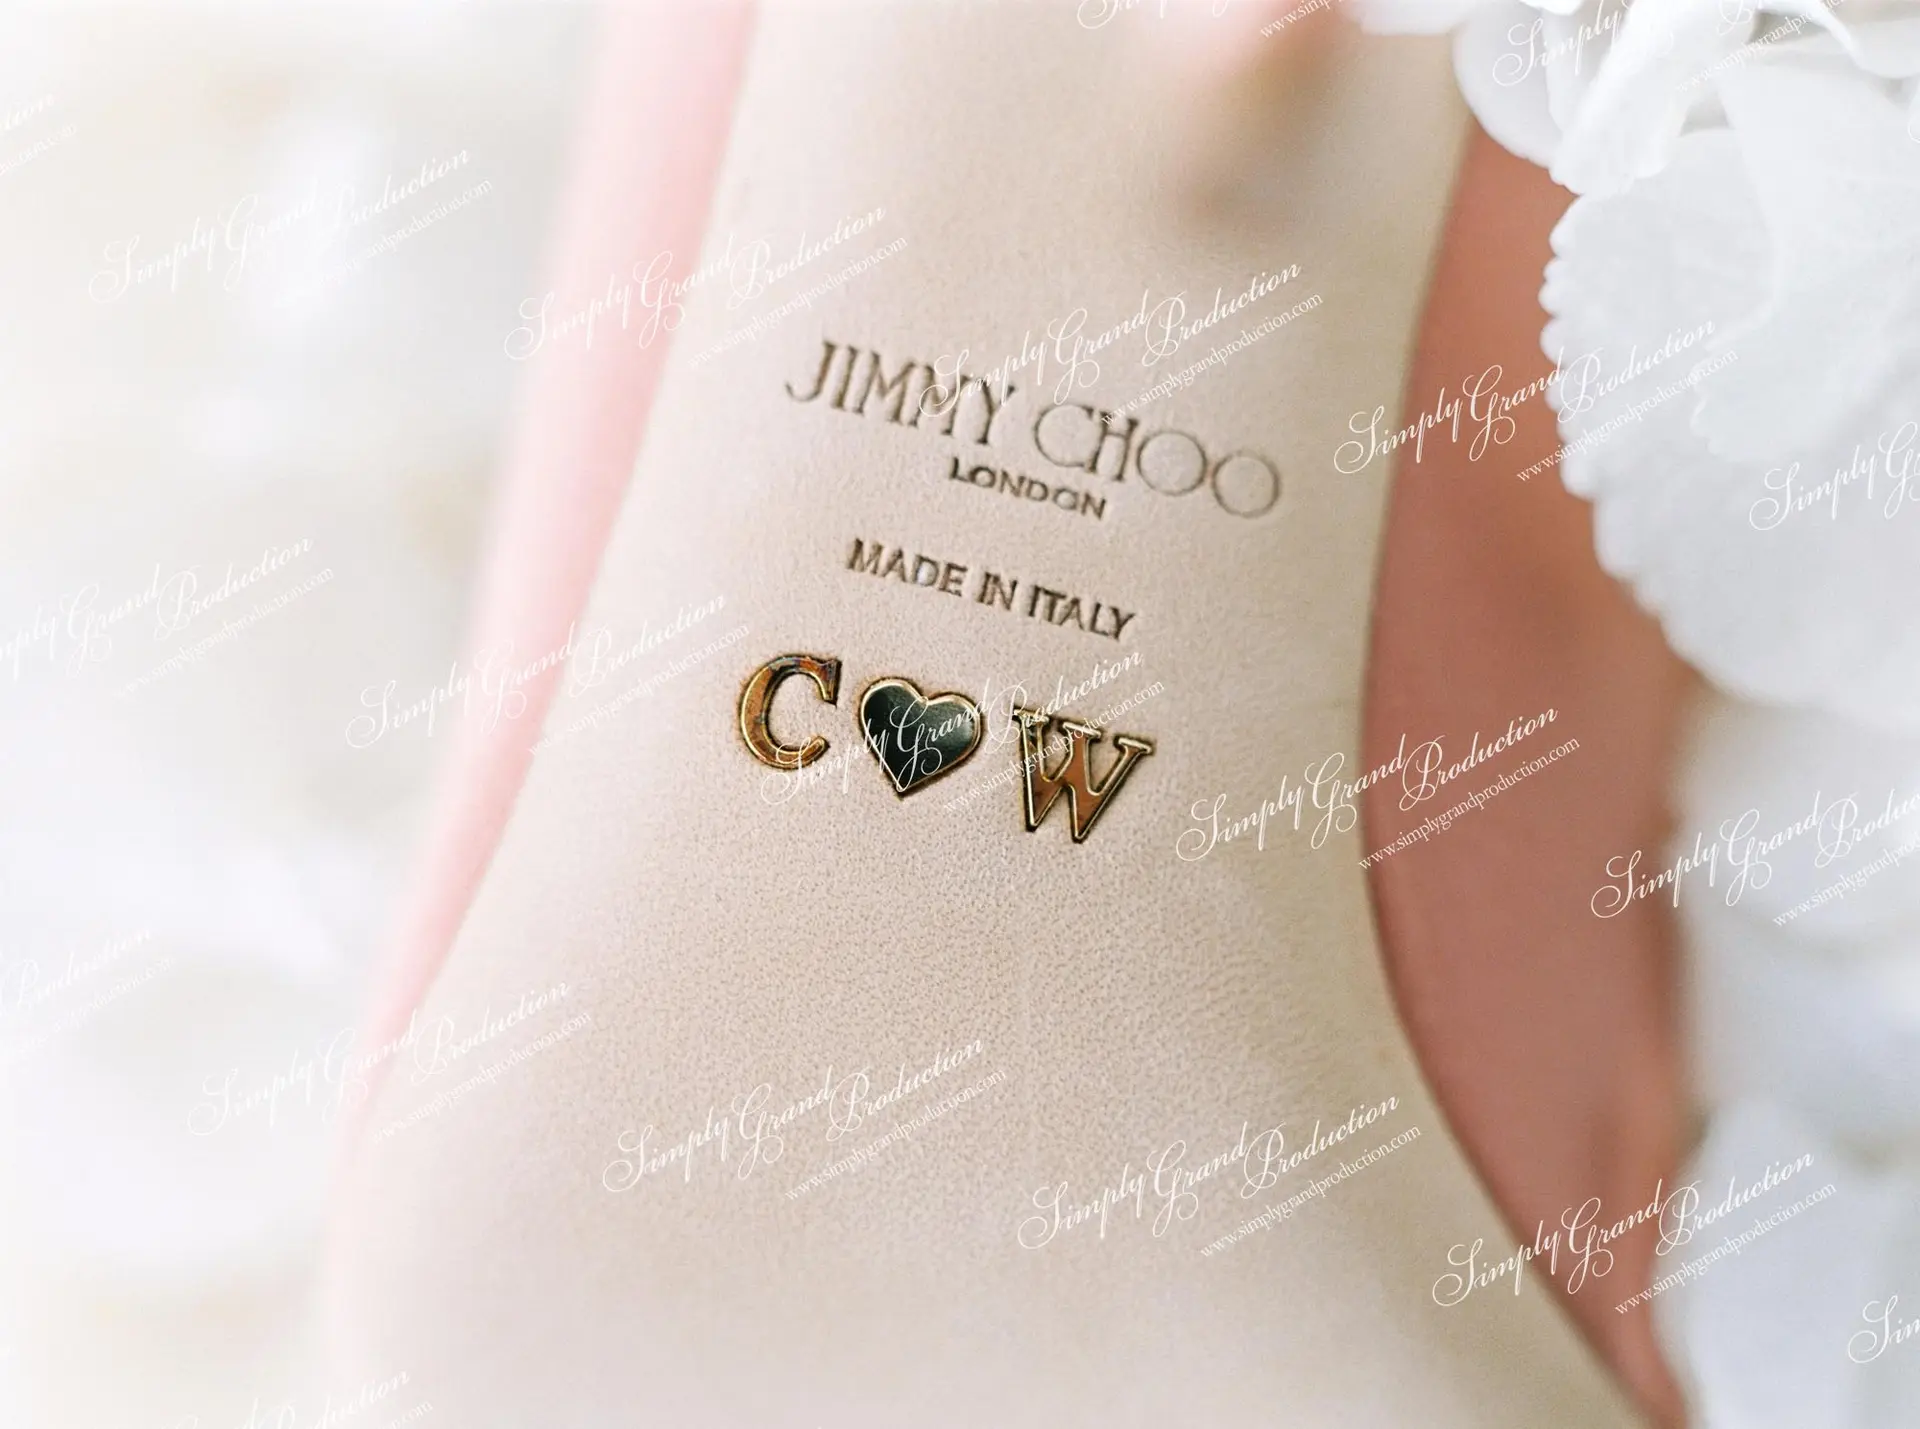 Simply_Grand_Production_wedding_decoration_shoe_couple_logo_Outdoor_Country_Club_1_2.jpg